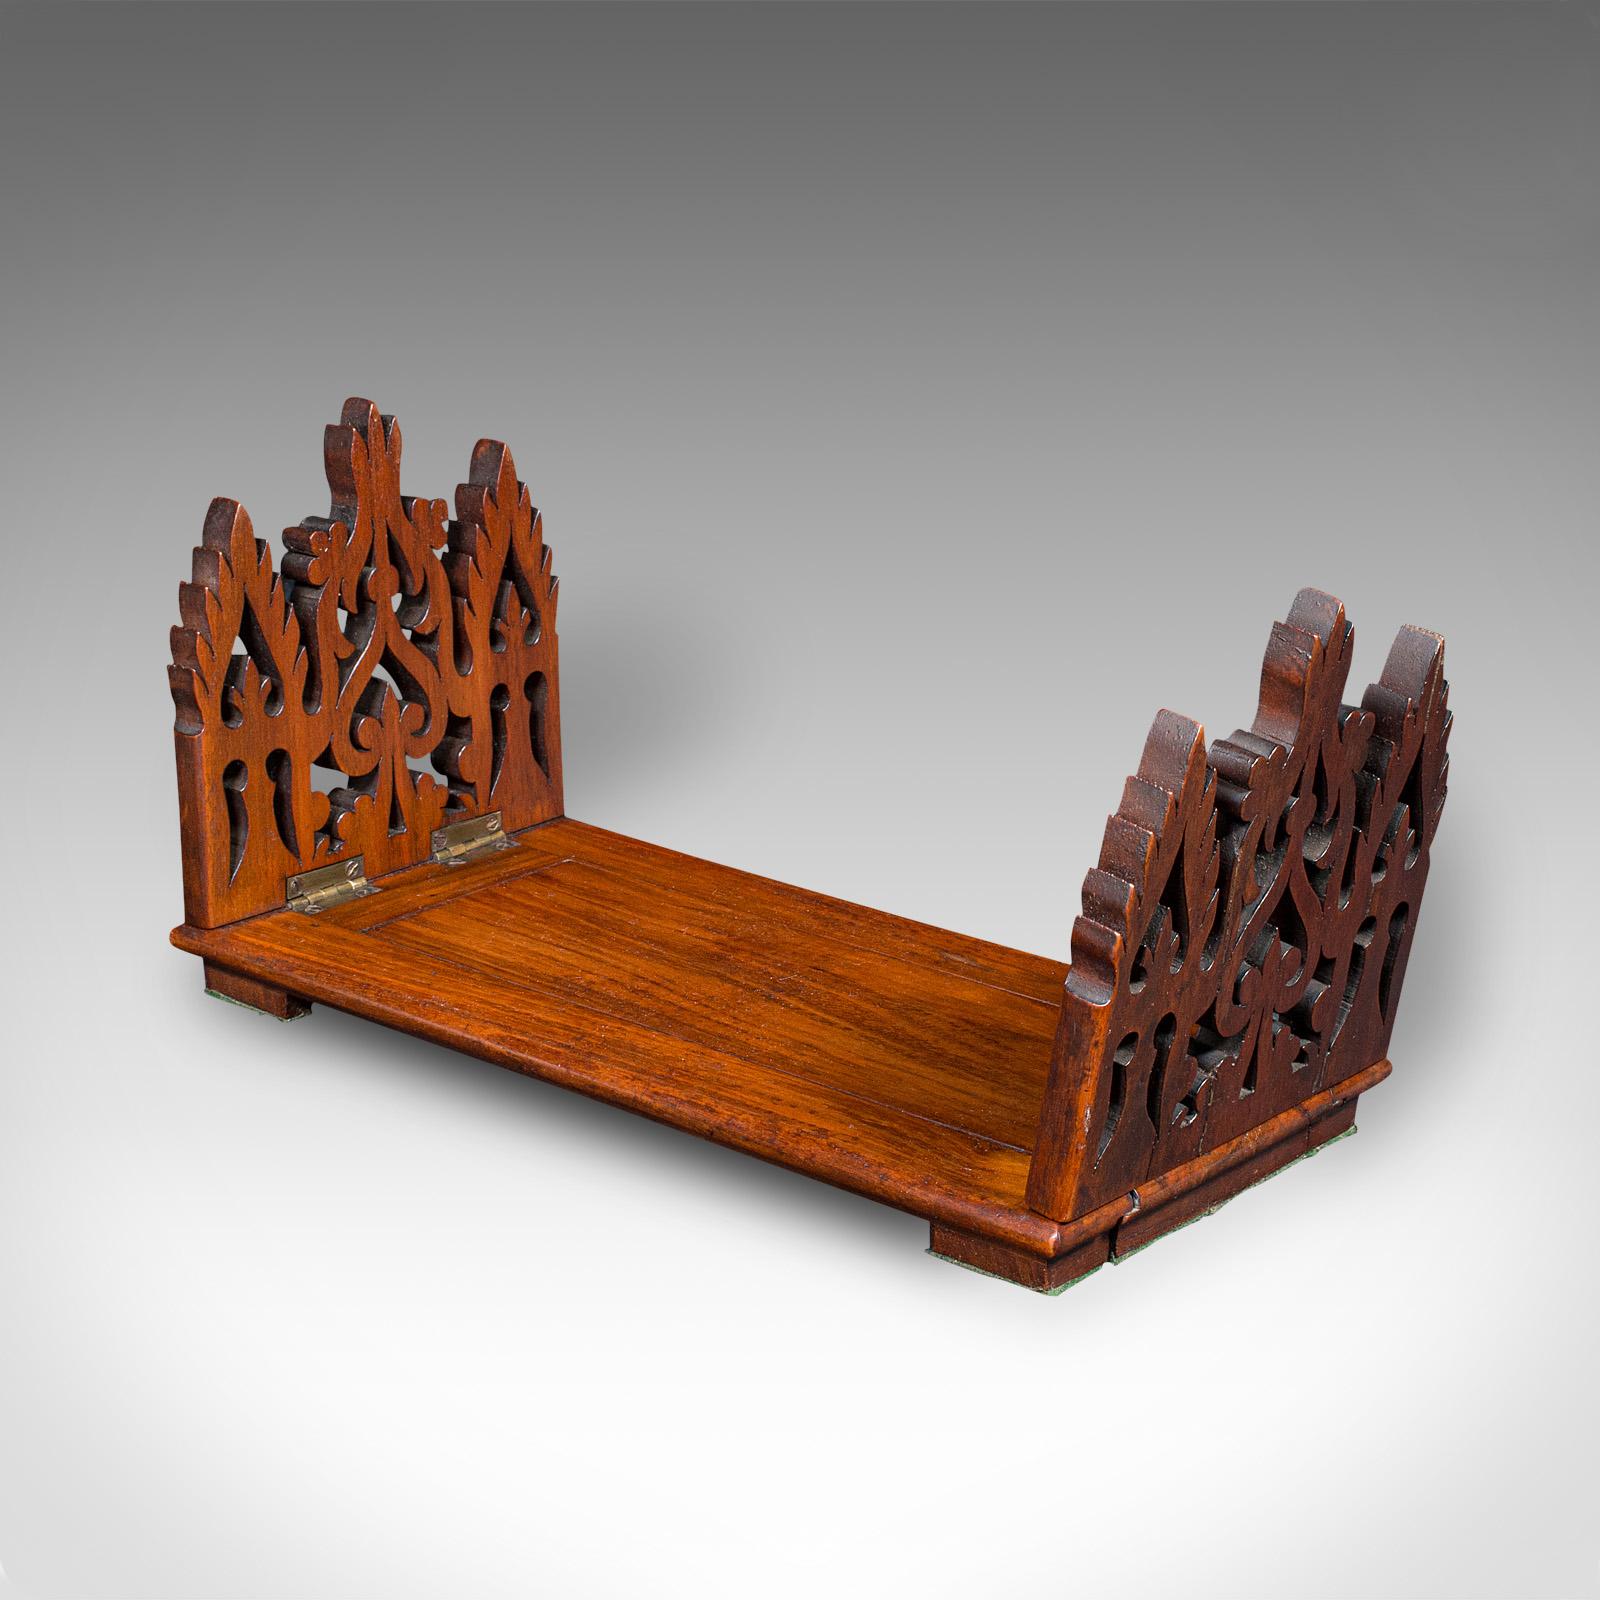 19th Century Antique Book Slide, English, Walnut, Extending, Novel Stand, Victorian, C.1850 For Sale